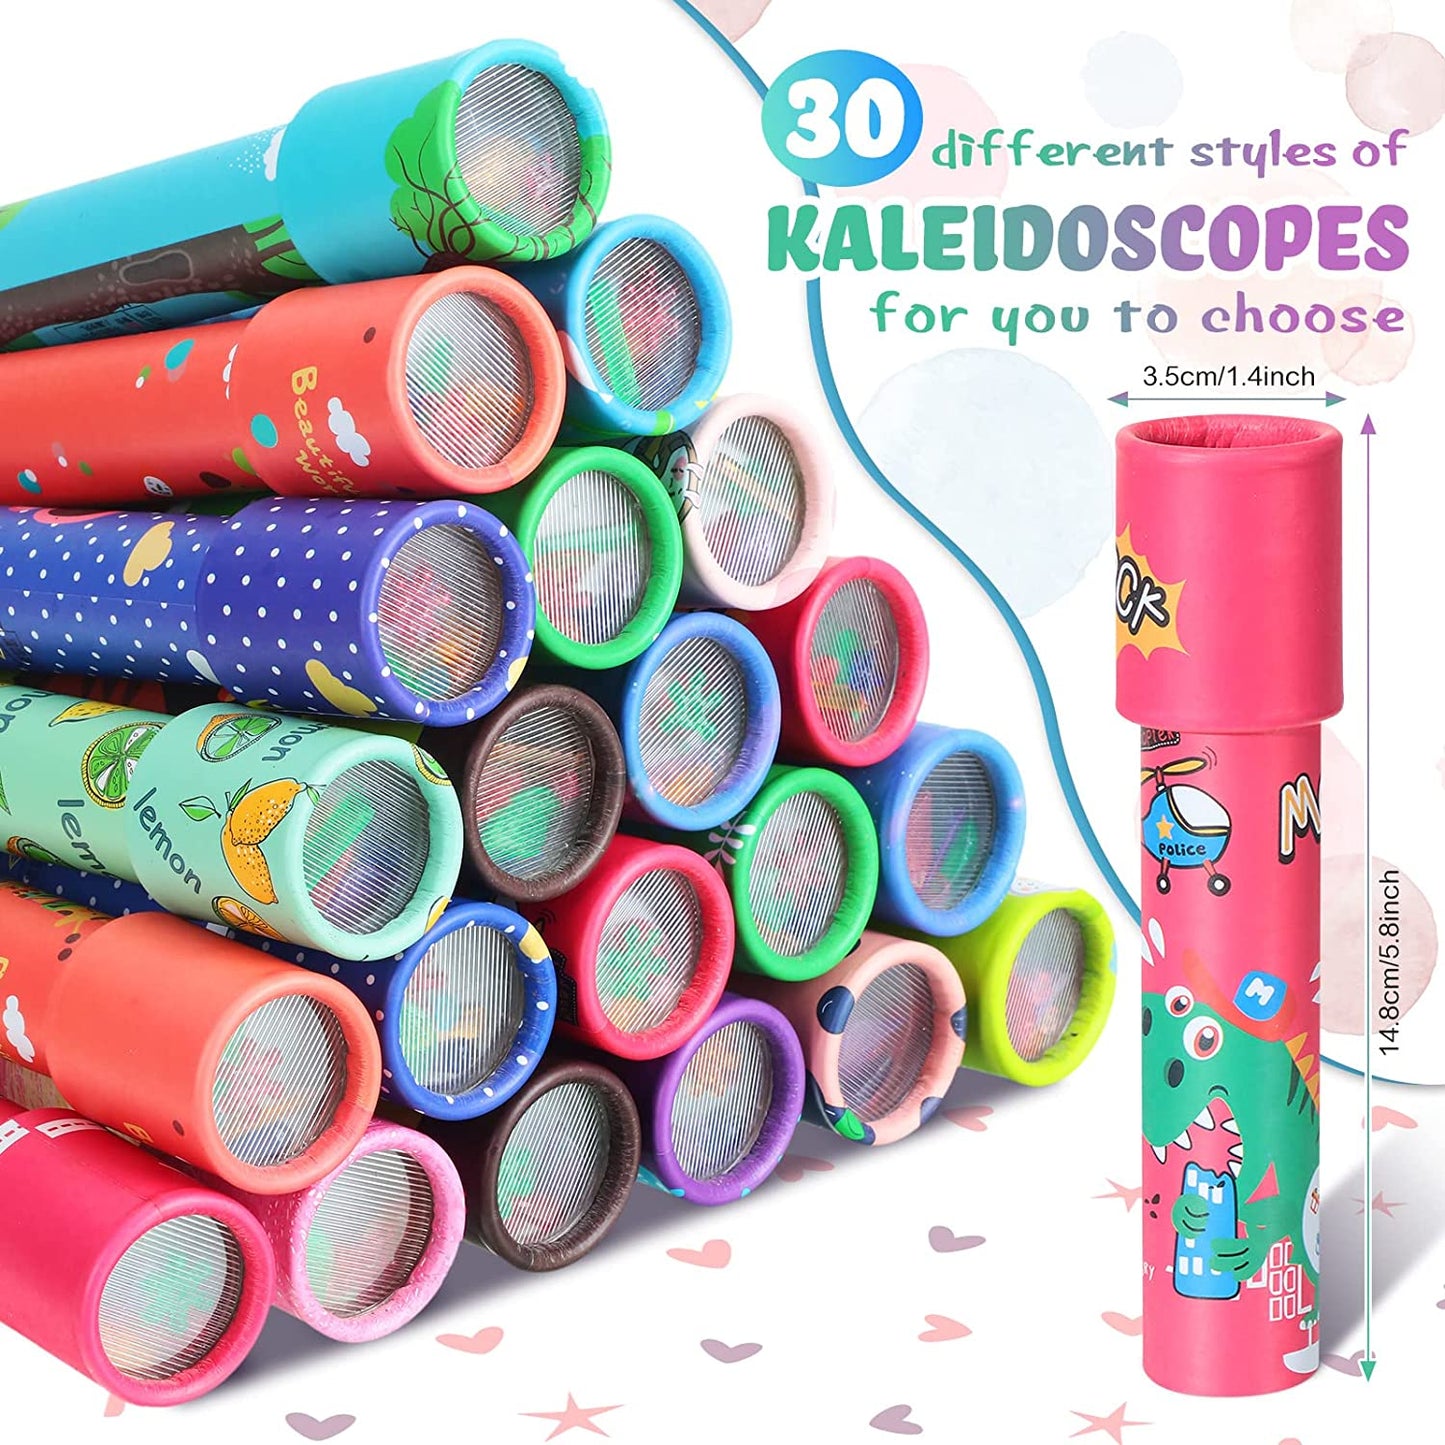 30 Pcs Classic Kaleidoscopes Educational Toy Vintage Kaleidoscope Favor Return Gifts for Kids Teens Birthday Party School Prize Friendship Graduation Gift Stock Stuffer, 5.8 x 1.4 Inch (Lovely)